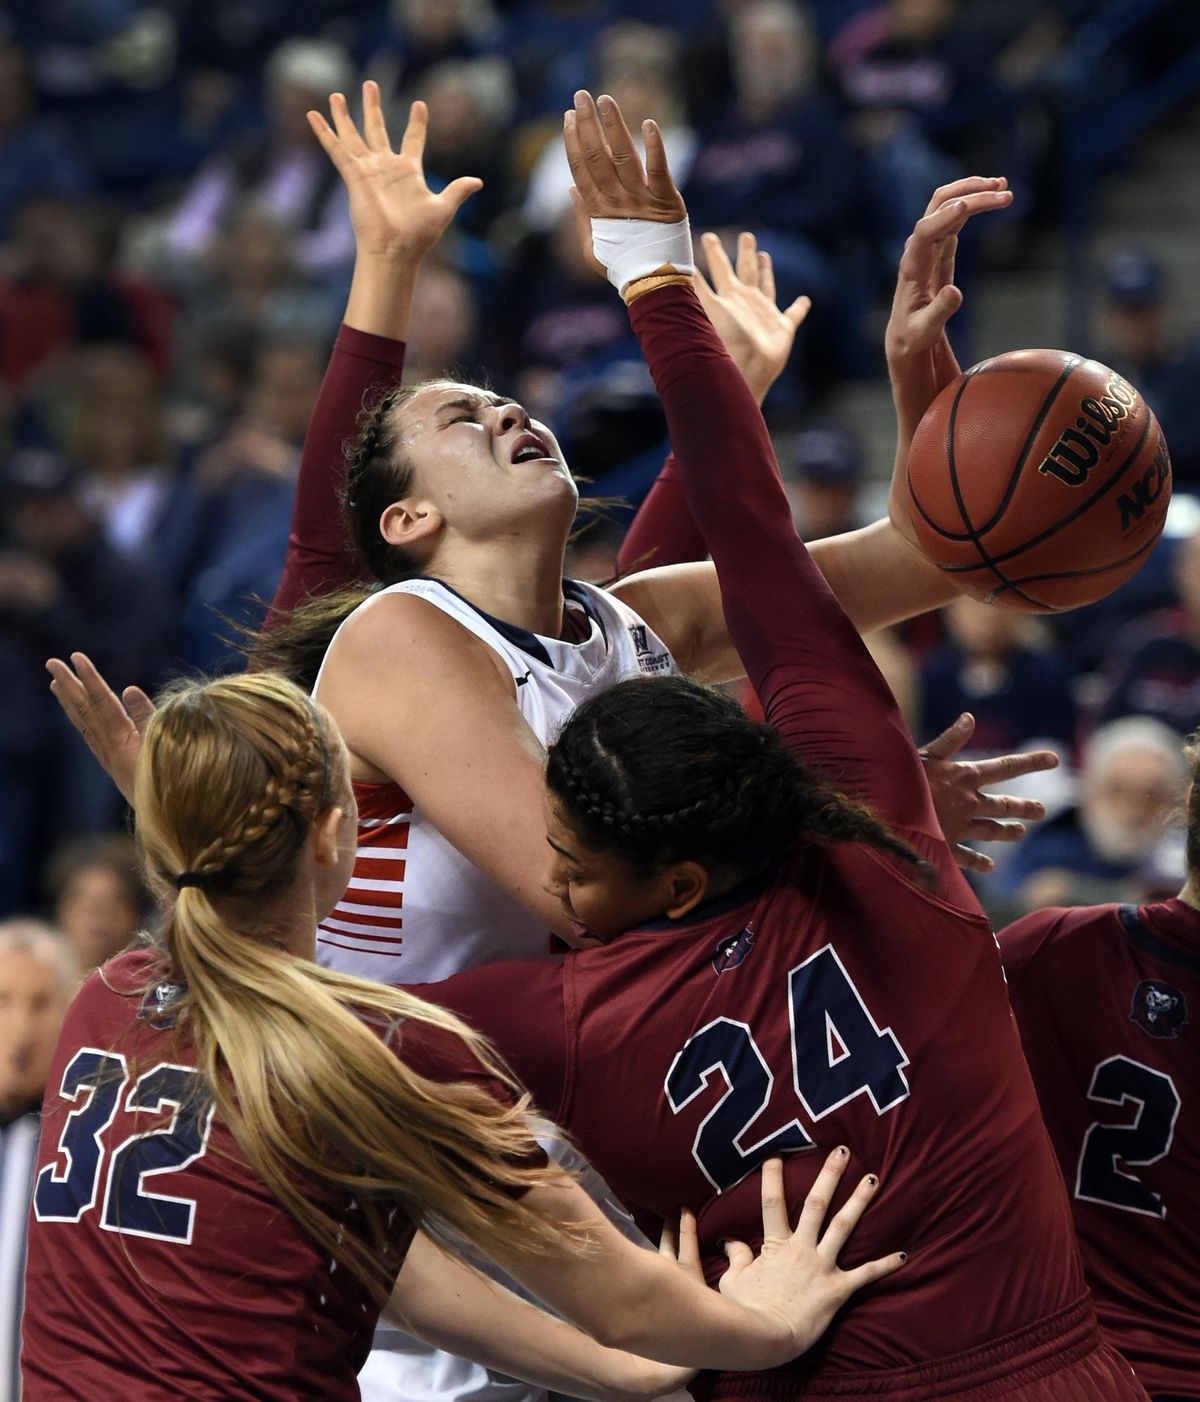 Gonzaga’s Jill Barta is fouled by Loyola Marymount’s Bree Alford (24) during second-half action on Thursday in Spokane. (Colin Mulvany / The Spokesman-Review)